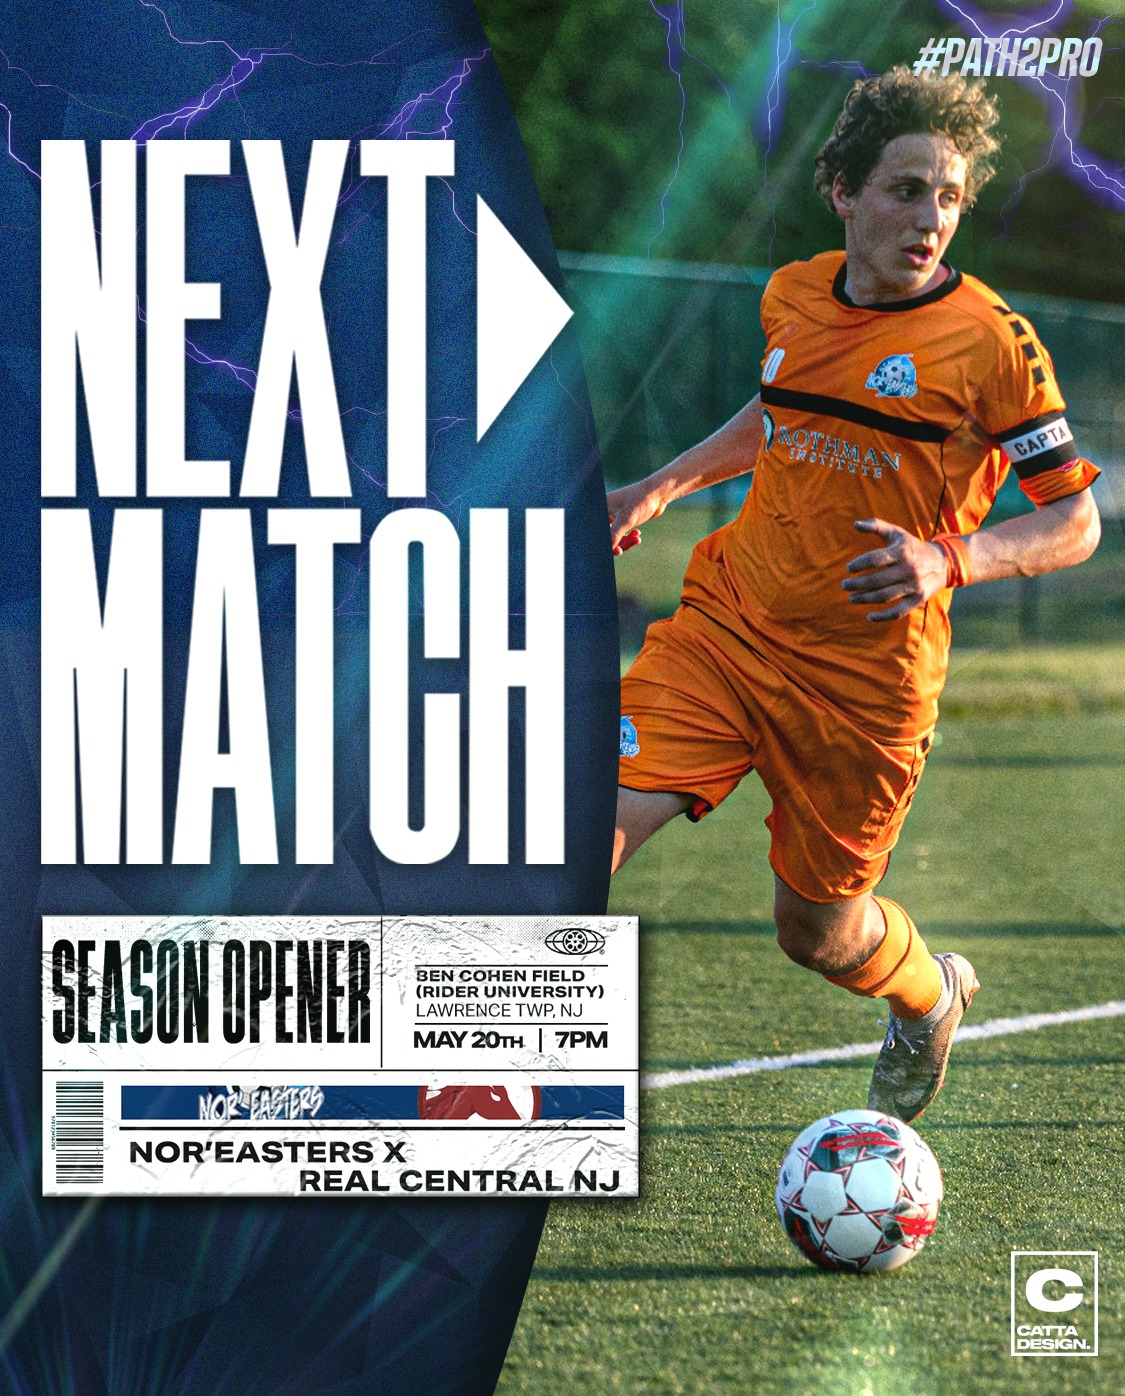 Preview: Nor'easters open season at Real Central NJ for third year in a row